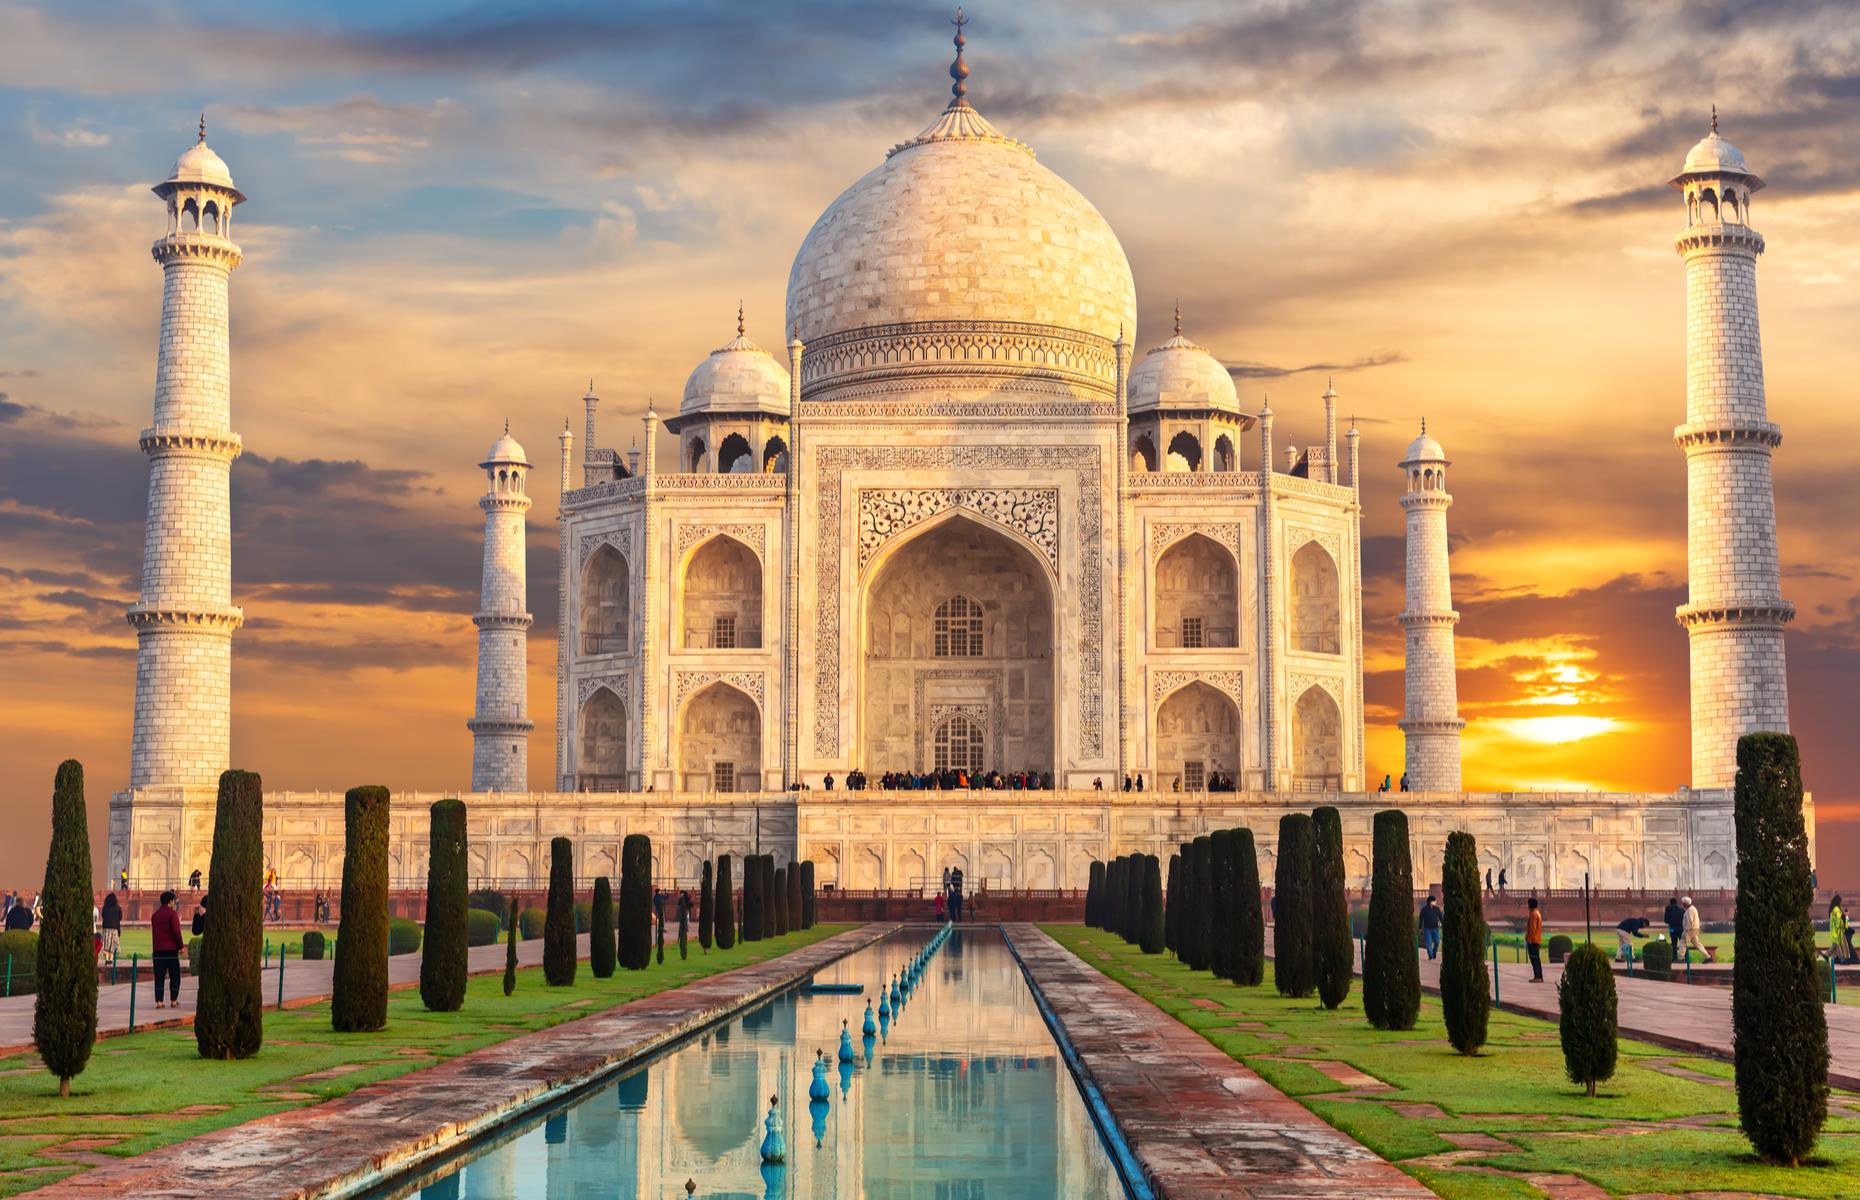 <p>Agrabah's lavish Sultan’s Palace in the 1992 animation <em>Aladdin – </em>home of the Sultan, Princess Jasmine and the dastardly Jafar – was loosely inspired by India’s most famous monument, the Taj Mahal. The artists drew on the 17th-century mausoleum’s white marble façade, onion domes and minaret towers, as well as its pools and fountain. It’s not surprising that the building influenced the animators, as the Taj Mahal is considered one of the finest examples of Mughal architecture, mixing Persian, Indian and Islamic architectural styles.</p>